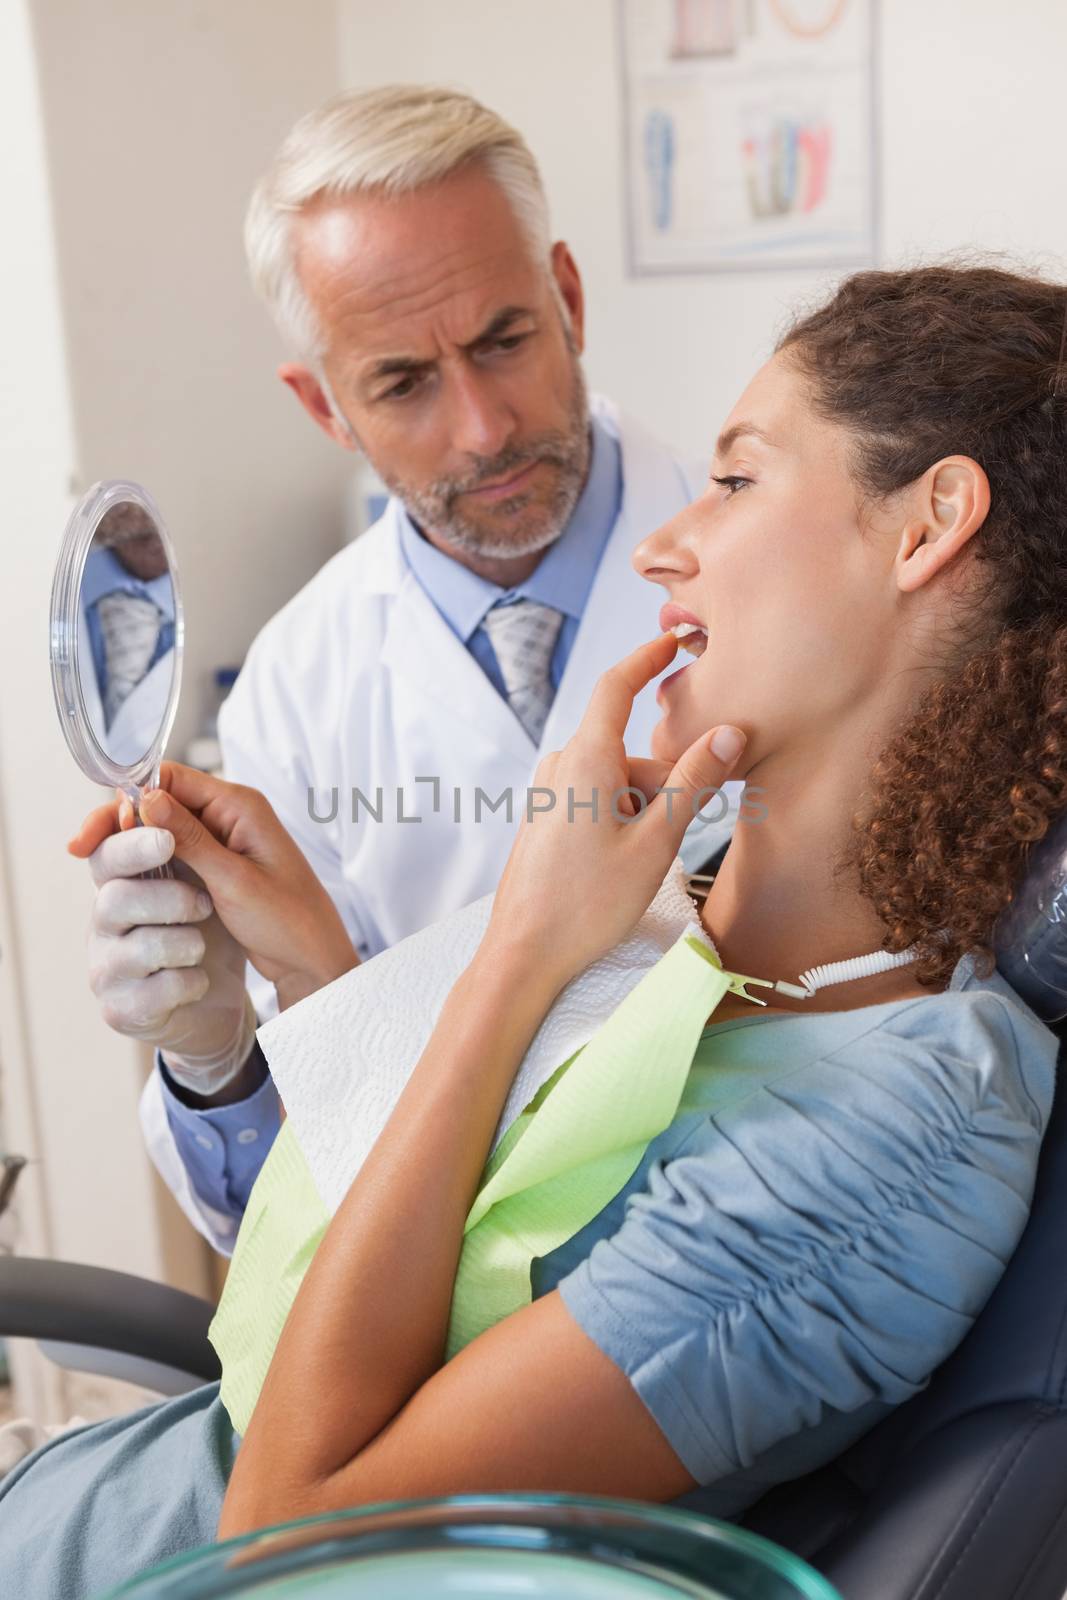 Patient showing dentist the problem in the mirror at the dental clinic